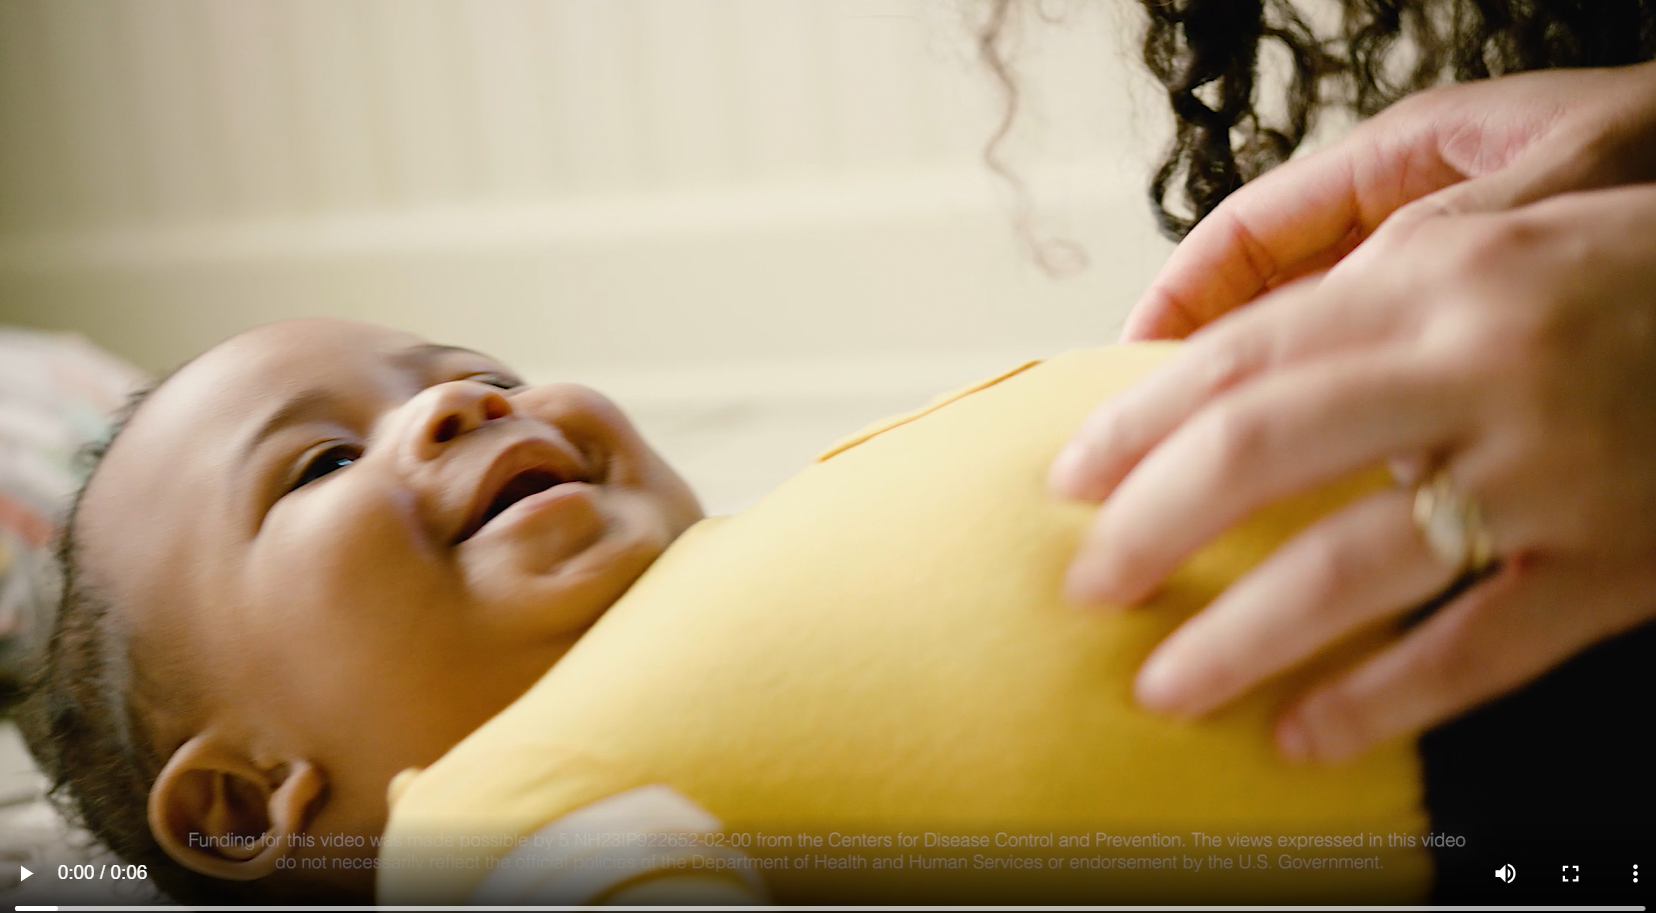 An African American baby smiles while his mom rubs his stomach